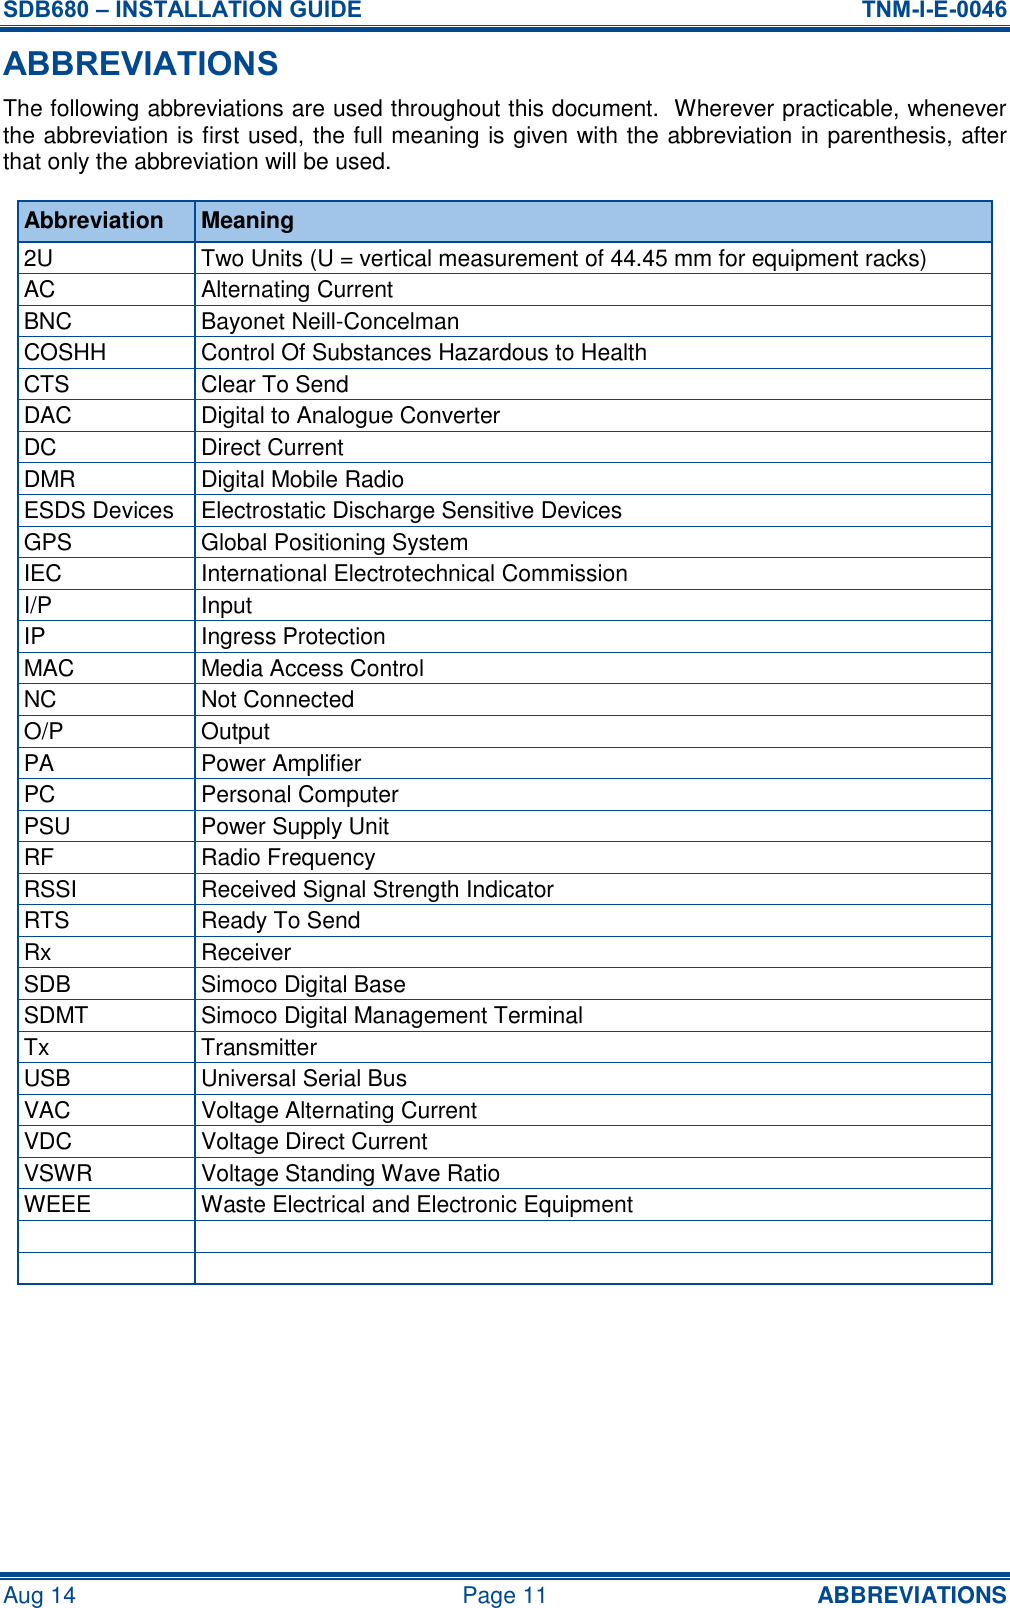 SDB680 – INSTALLATION GUIDE  TNM-I-E-0046 Aug 14  Page 11 ABBREVIATIONS ABBREVIATIONS The following abbreviations are used throughout this document.  Wherever practicable, whenever the abbreviation is first used, the full meaning is given with the abbreviation in parenthesis, after that only the abbreviation will be used. Abbreviation Meaning 2U Two Units (U = vertical measurement of 44.45 mm for equipment racks) AC Alternating Current BNC Bayonet Neill-Concelman COSHH Control Of Substances Hazardous to Health CTS Clear To Send DAC Digital to Analogue Converter DC Direct Current DMR Digital Mobile Radio ESDS Devices Electrostatic Discharge Sensitive Devices GPS Global Positioning System IEC International Electrotechnical Commission I/P Input IP Ingress Protection MAC Media Access Control NC Not Connected O/P Output PA Power Amplifier PC Personal Computer PSU Power Supply Unit RF Radio Frequency RSSI Received Signal Strength Indicator RTS Ready To Send Rx Receiver SDB Simoco Digital Base SDMT Simoco Digital Management Terminal Tx Transmitter USB Universal Serial Bus VAC Voltage Alternating Current VDC Voltage Direct Current VSWR Voltage Standing Wave Ratio WEEE Waste Electrical and Electronic Equipment        